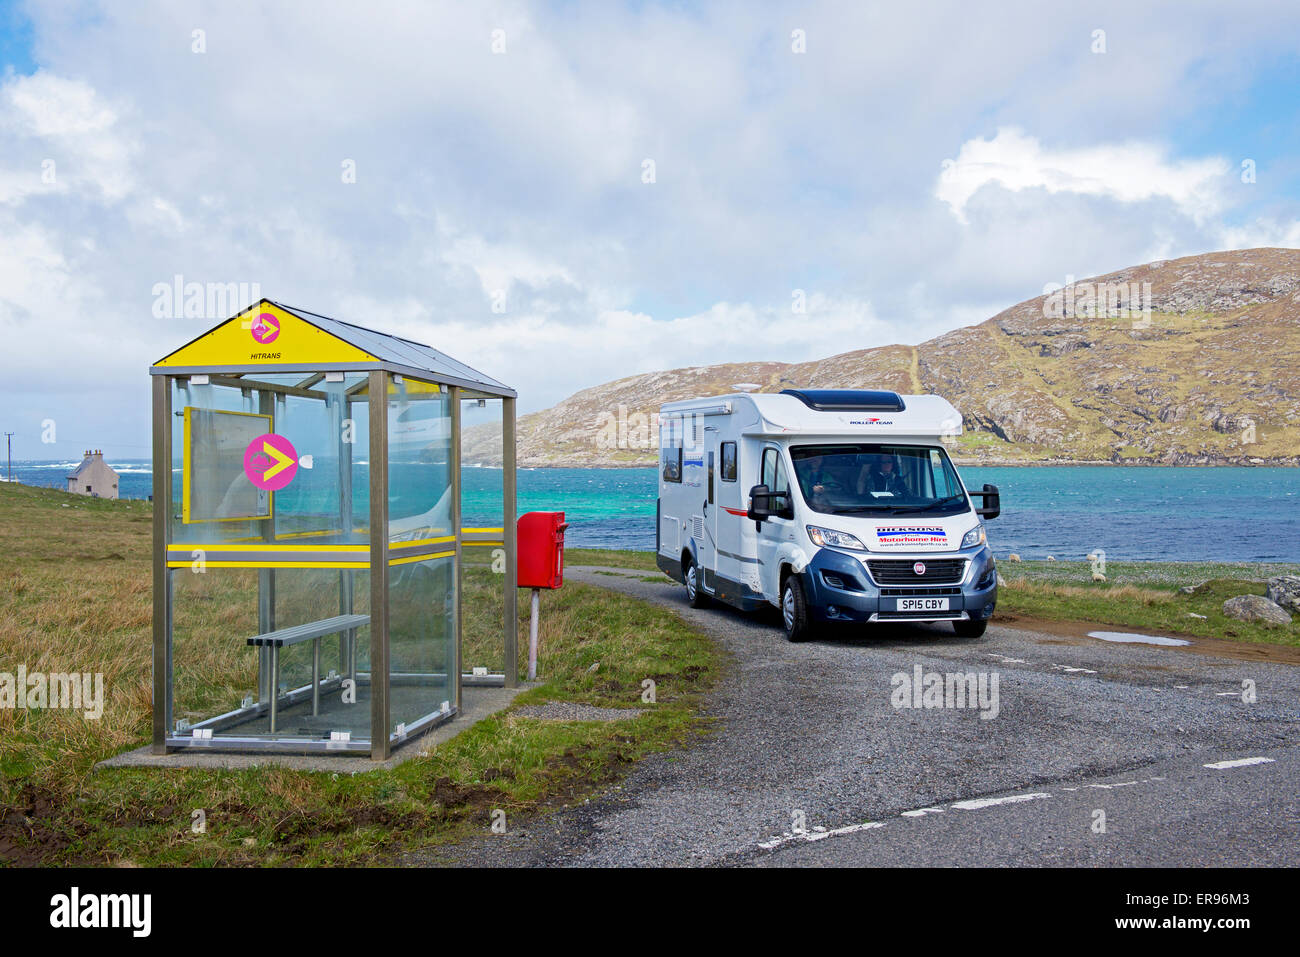 Motorhome and bus stop, Vatersay, Isle of Barra, Outer Hebrides, Scotland UK Stock Photo